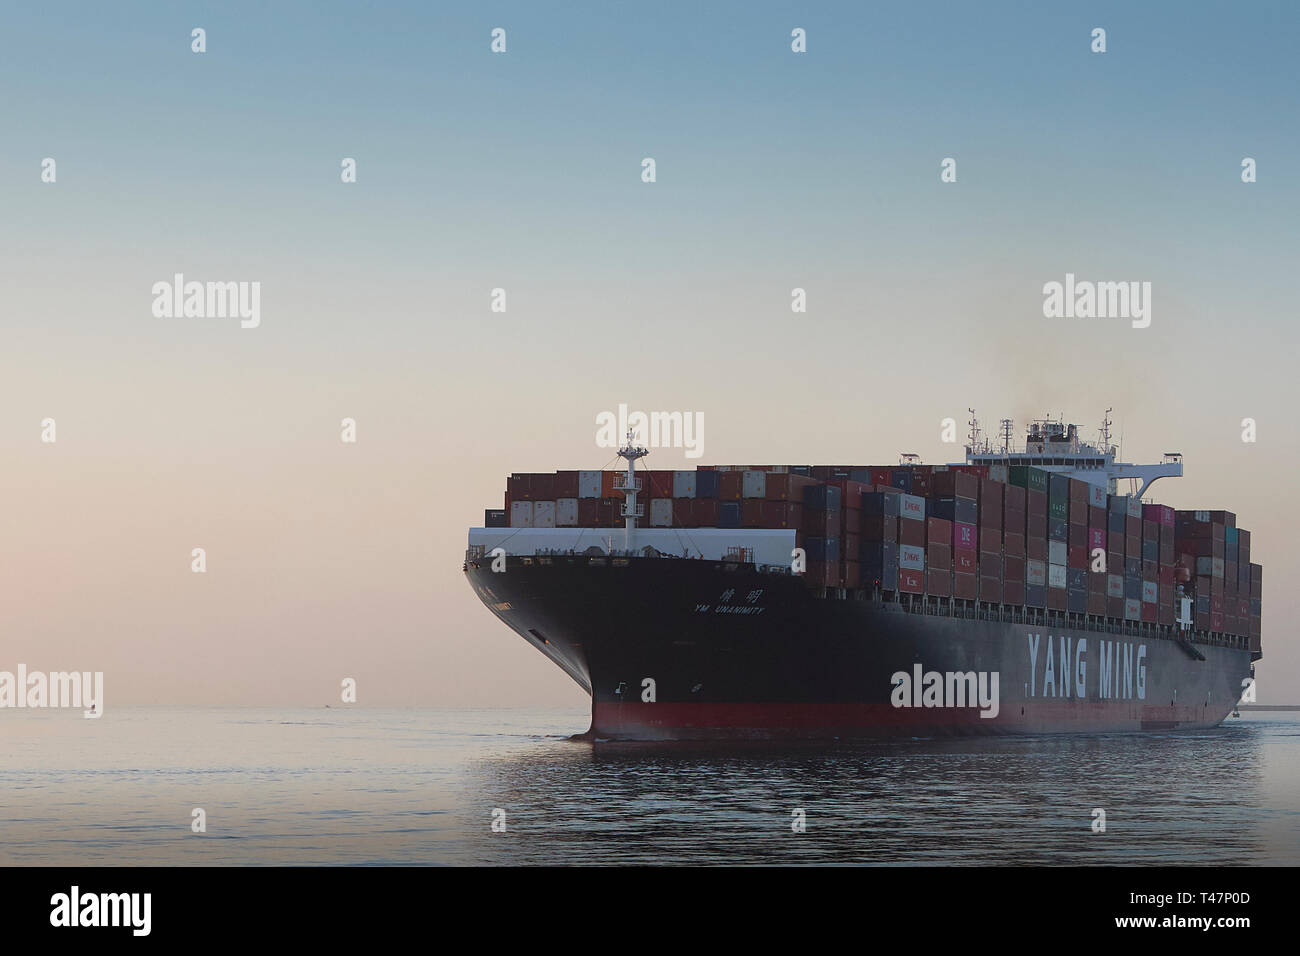 Head On Photo Of The Giant YANG MING Container Ship, YM UNANIMITY, At Sea, Steaming Towards The Port Of Los Angeles At Sunrise, California, USA. Stock Photo